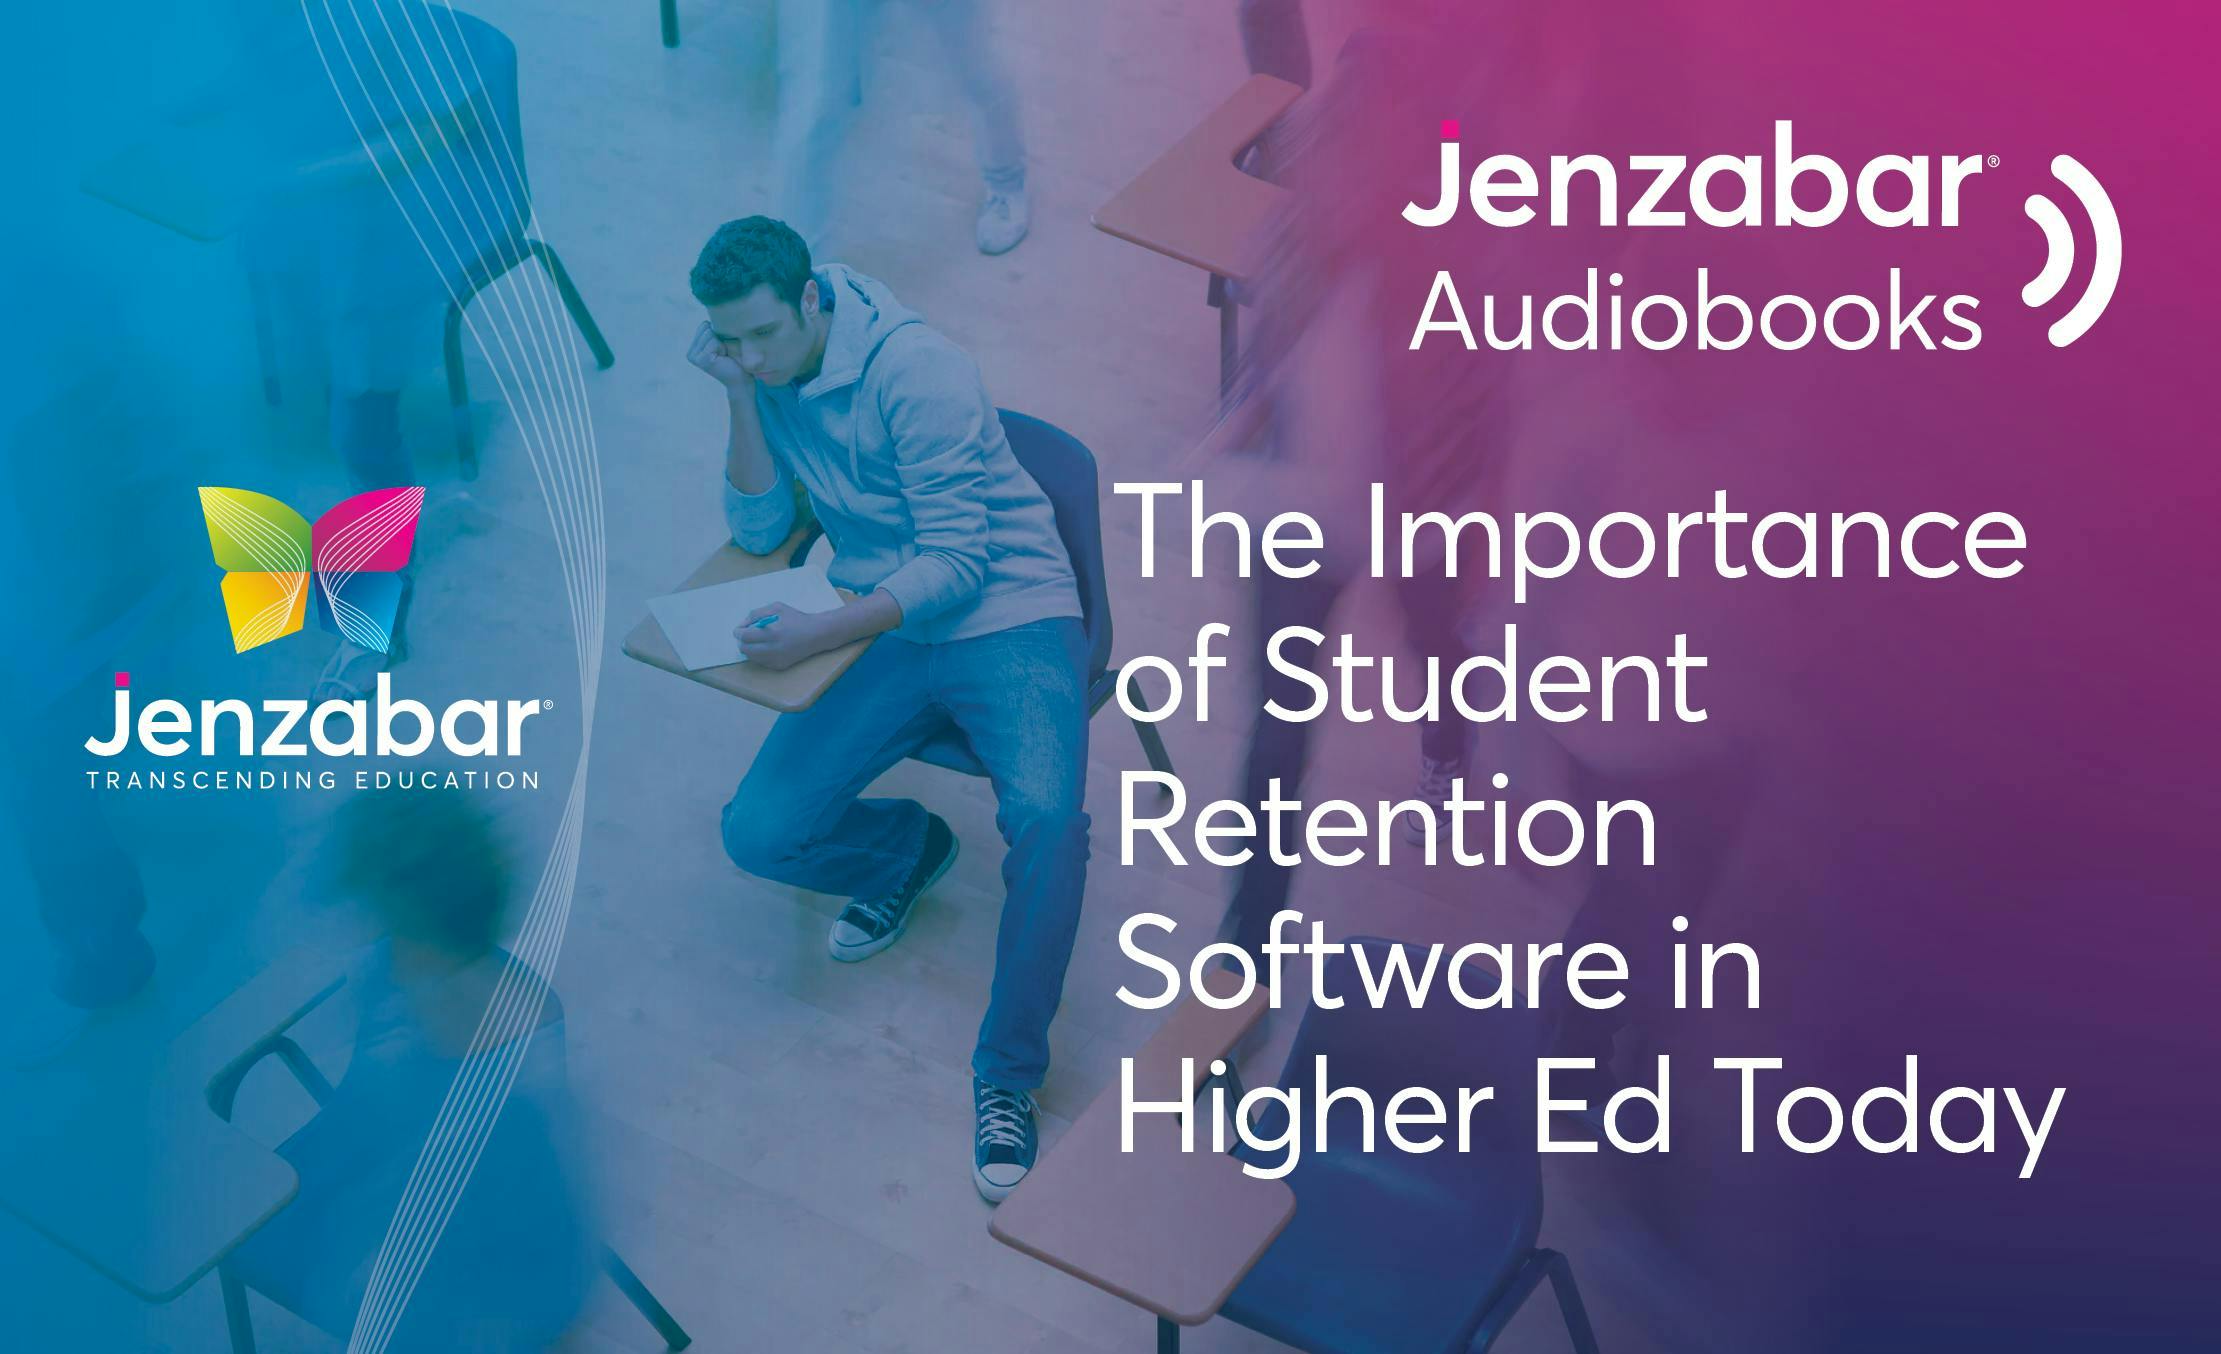 Audiobook: The Importance of Student Retention Software in Higher Ed Today